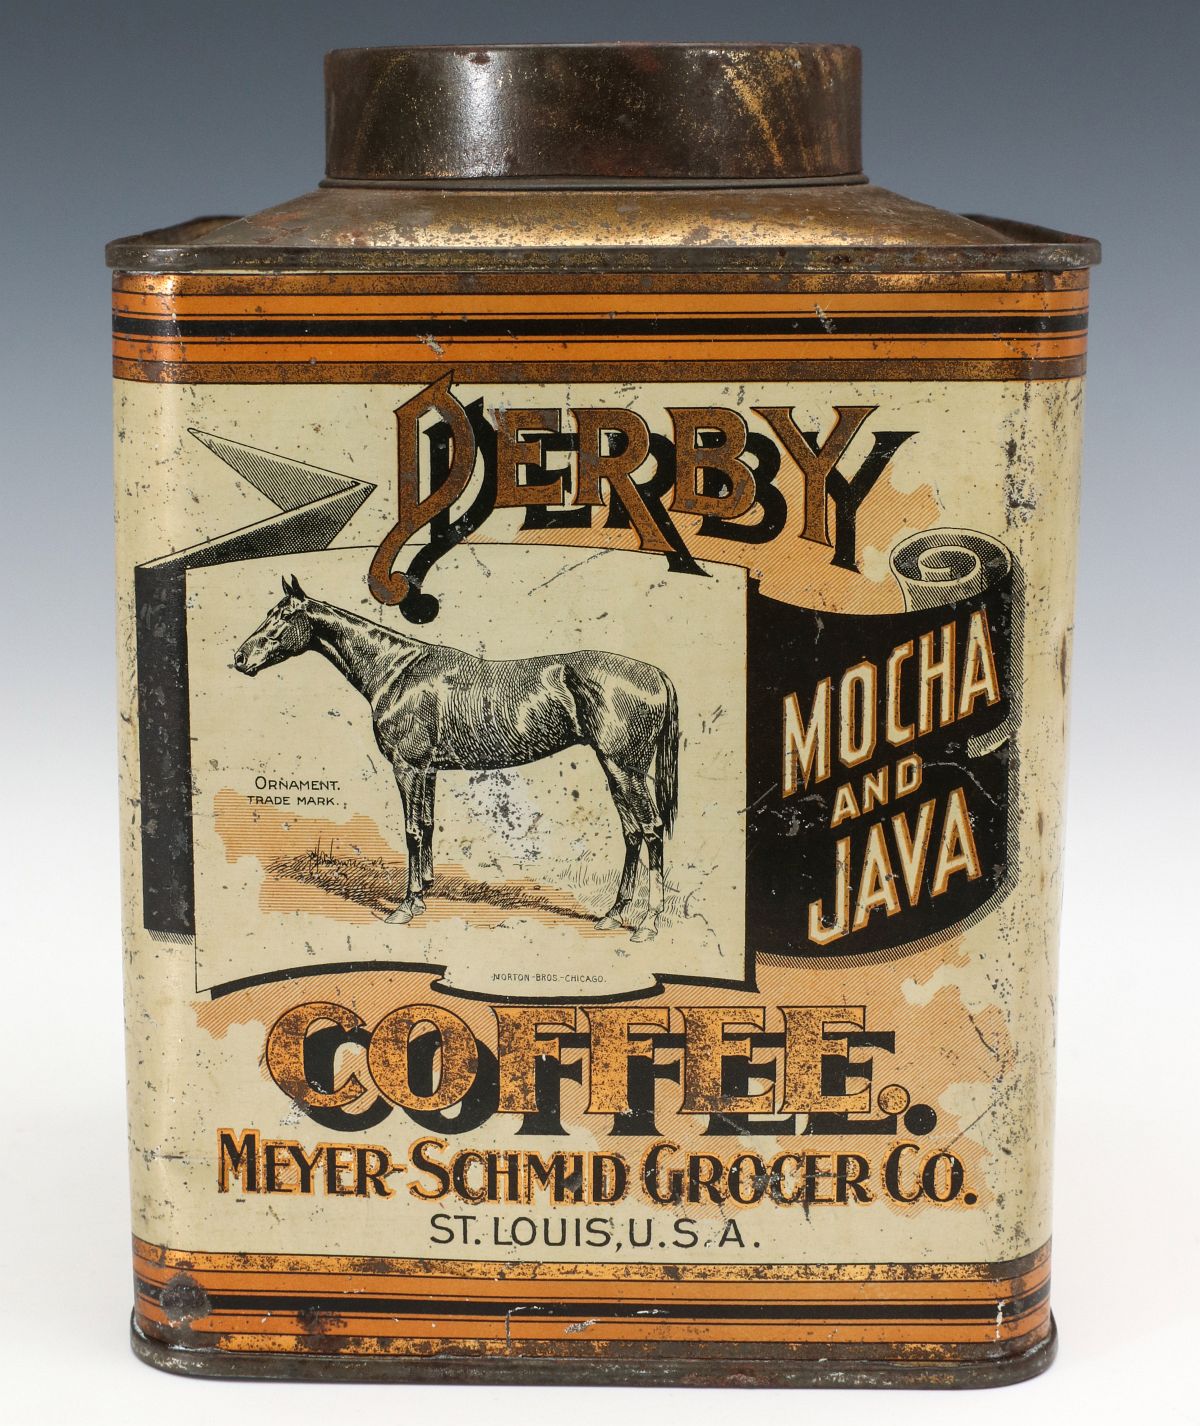 A DERBY MOCHA AND JAVA COFFEE ADVERTISING TIN